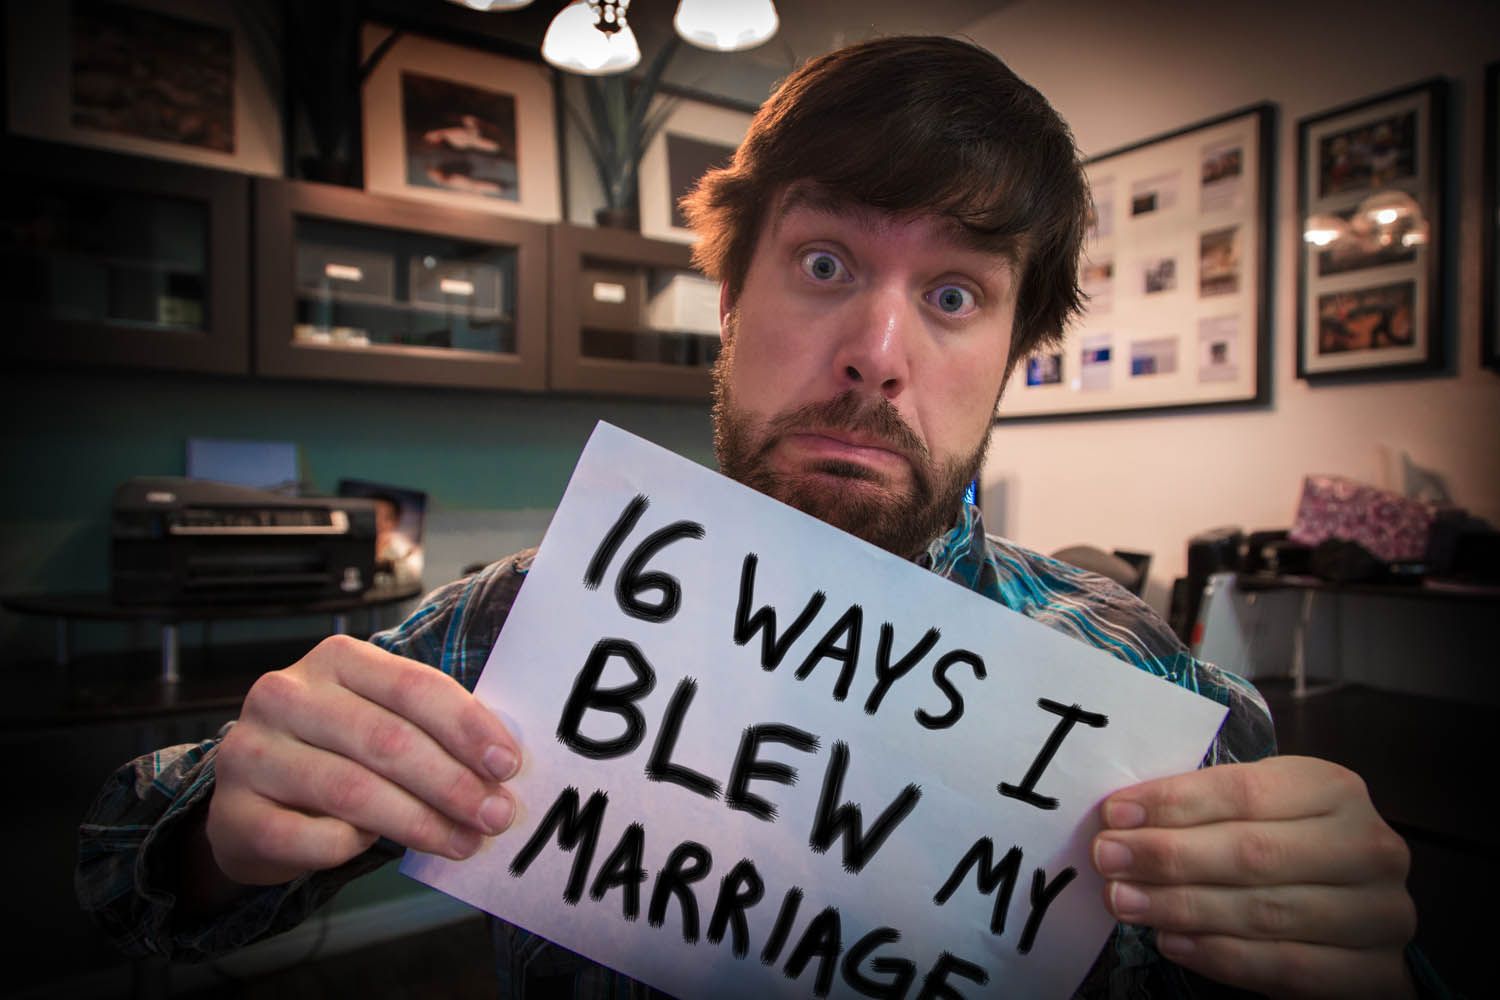 16 Ways Blew My Marriage: Cute and a good reminder. He's got some good insig